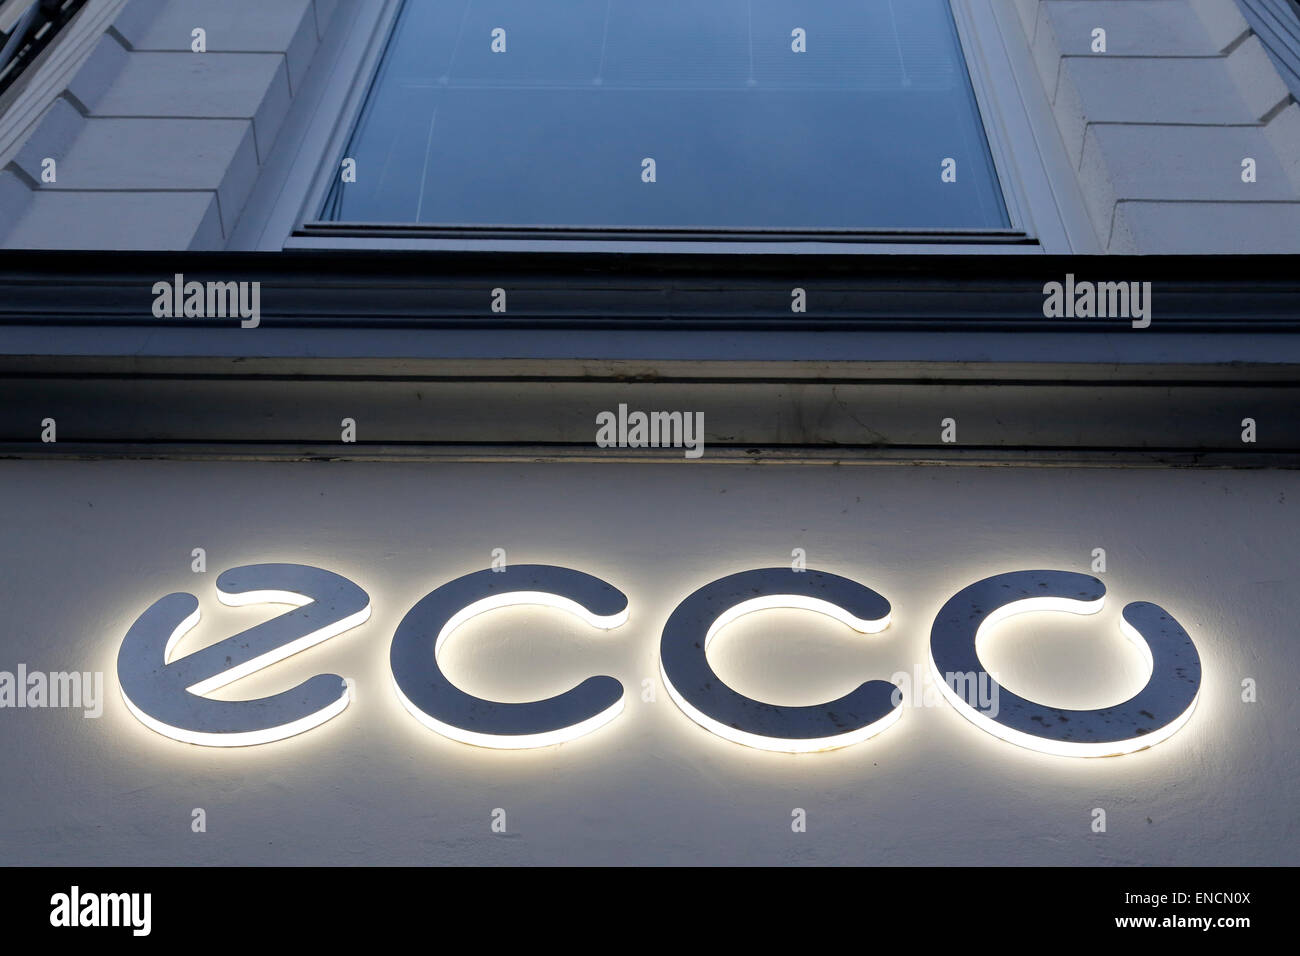 Ecco sign hi-res stock photography and images - Alamy